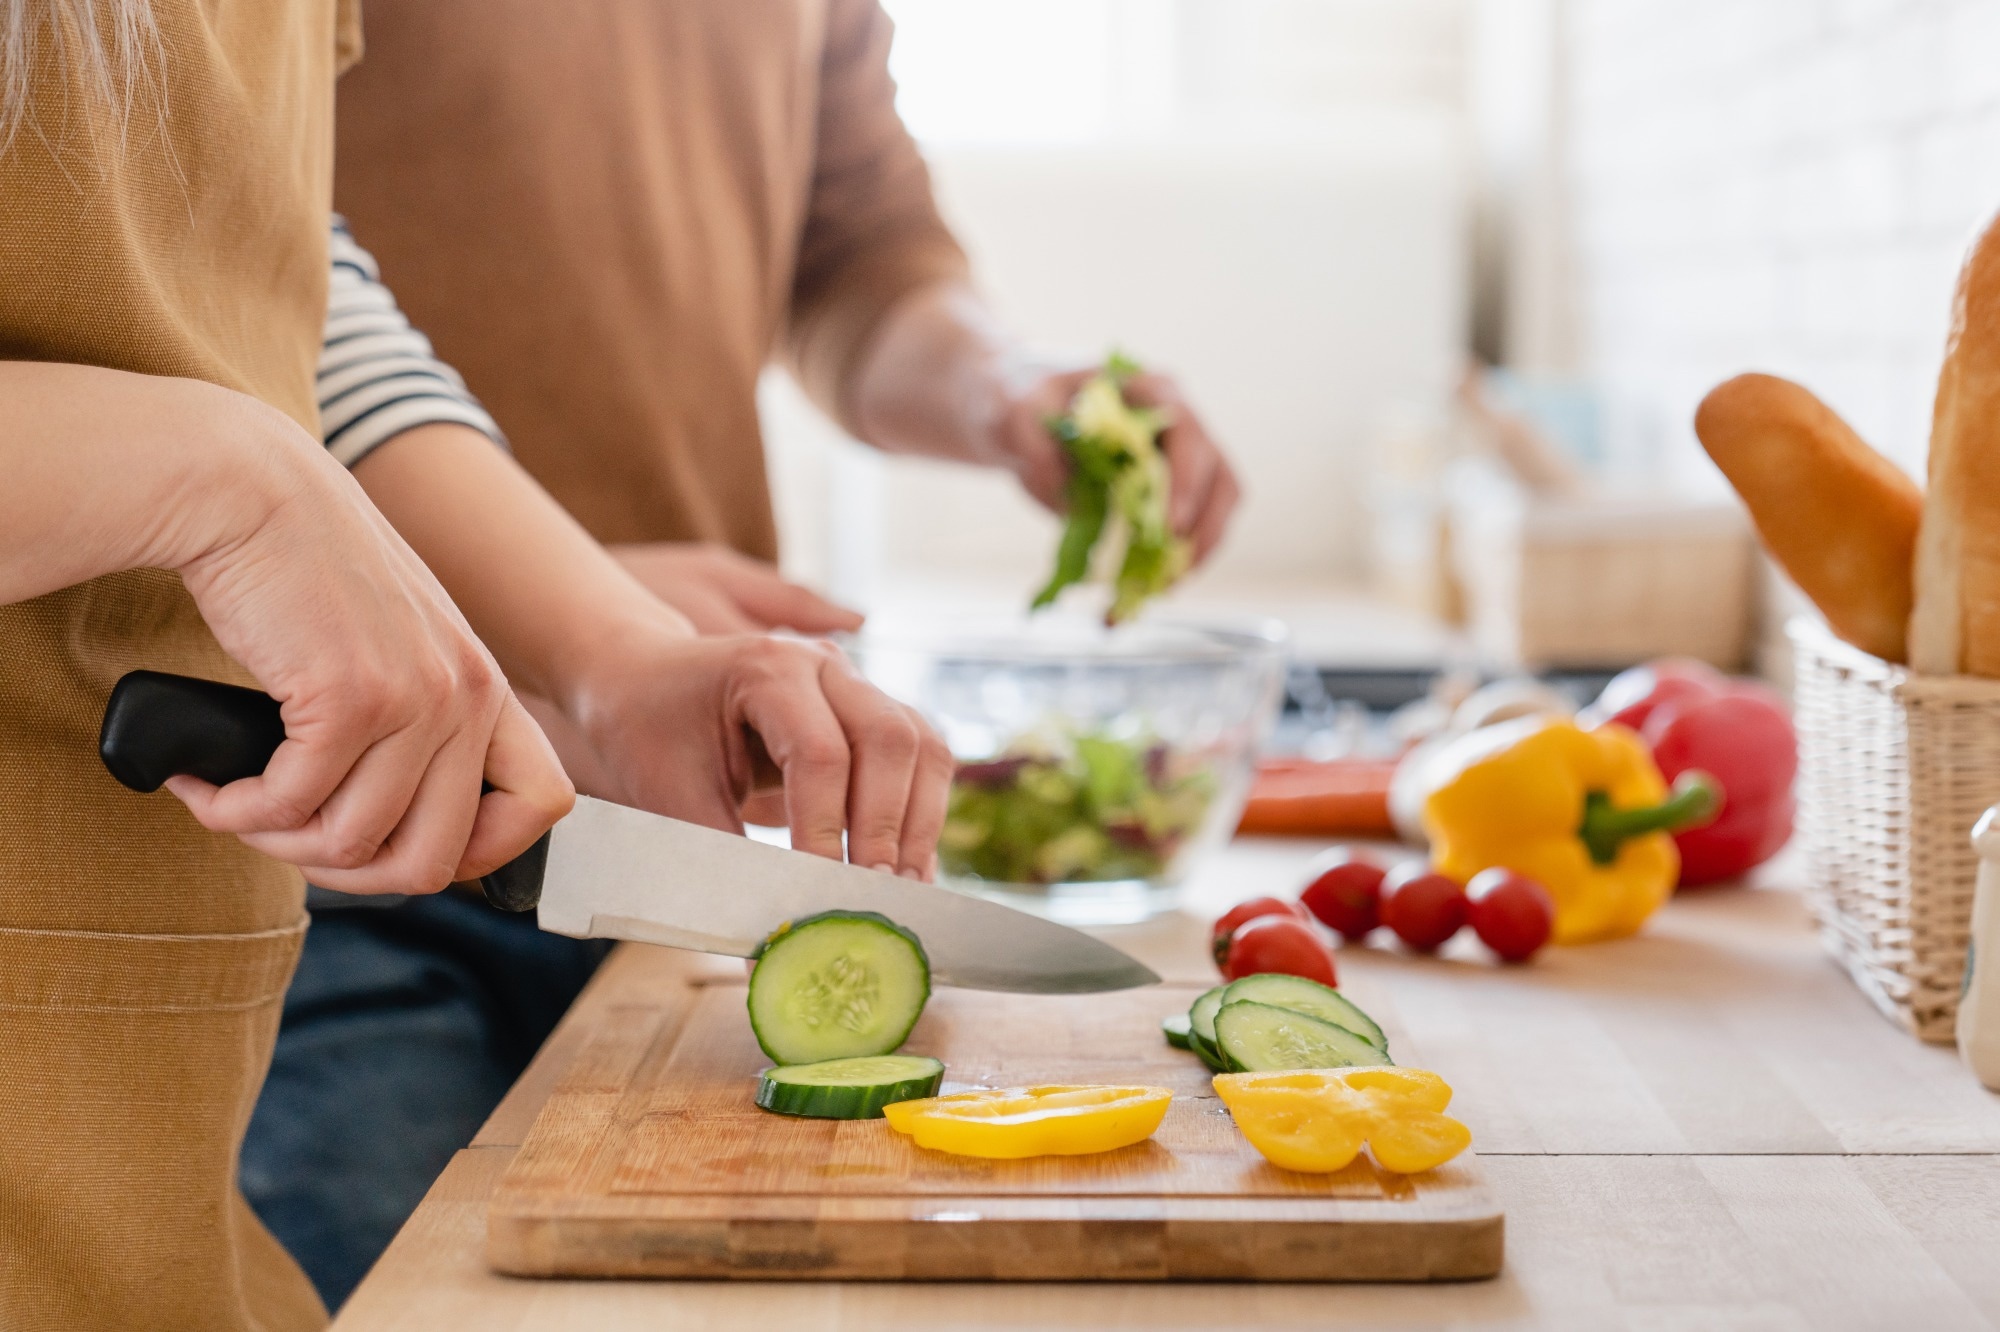 Study: Dietary Strategies to Reduce Triglycerides in Women of Reproductive Age: A Simulation Modelling Study. Image Credit: Inside Creative House / Shutterstock.com